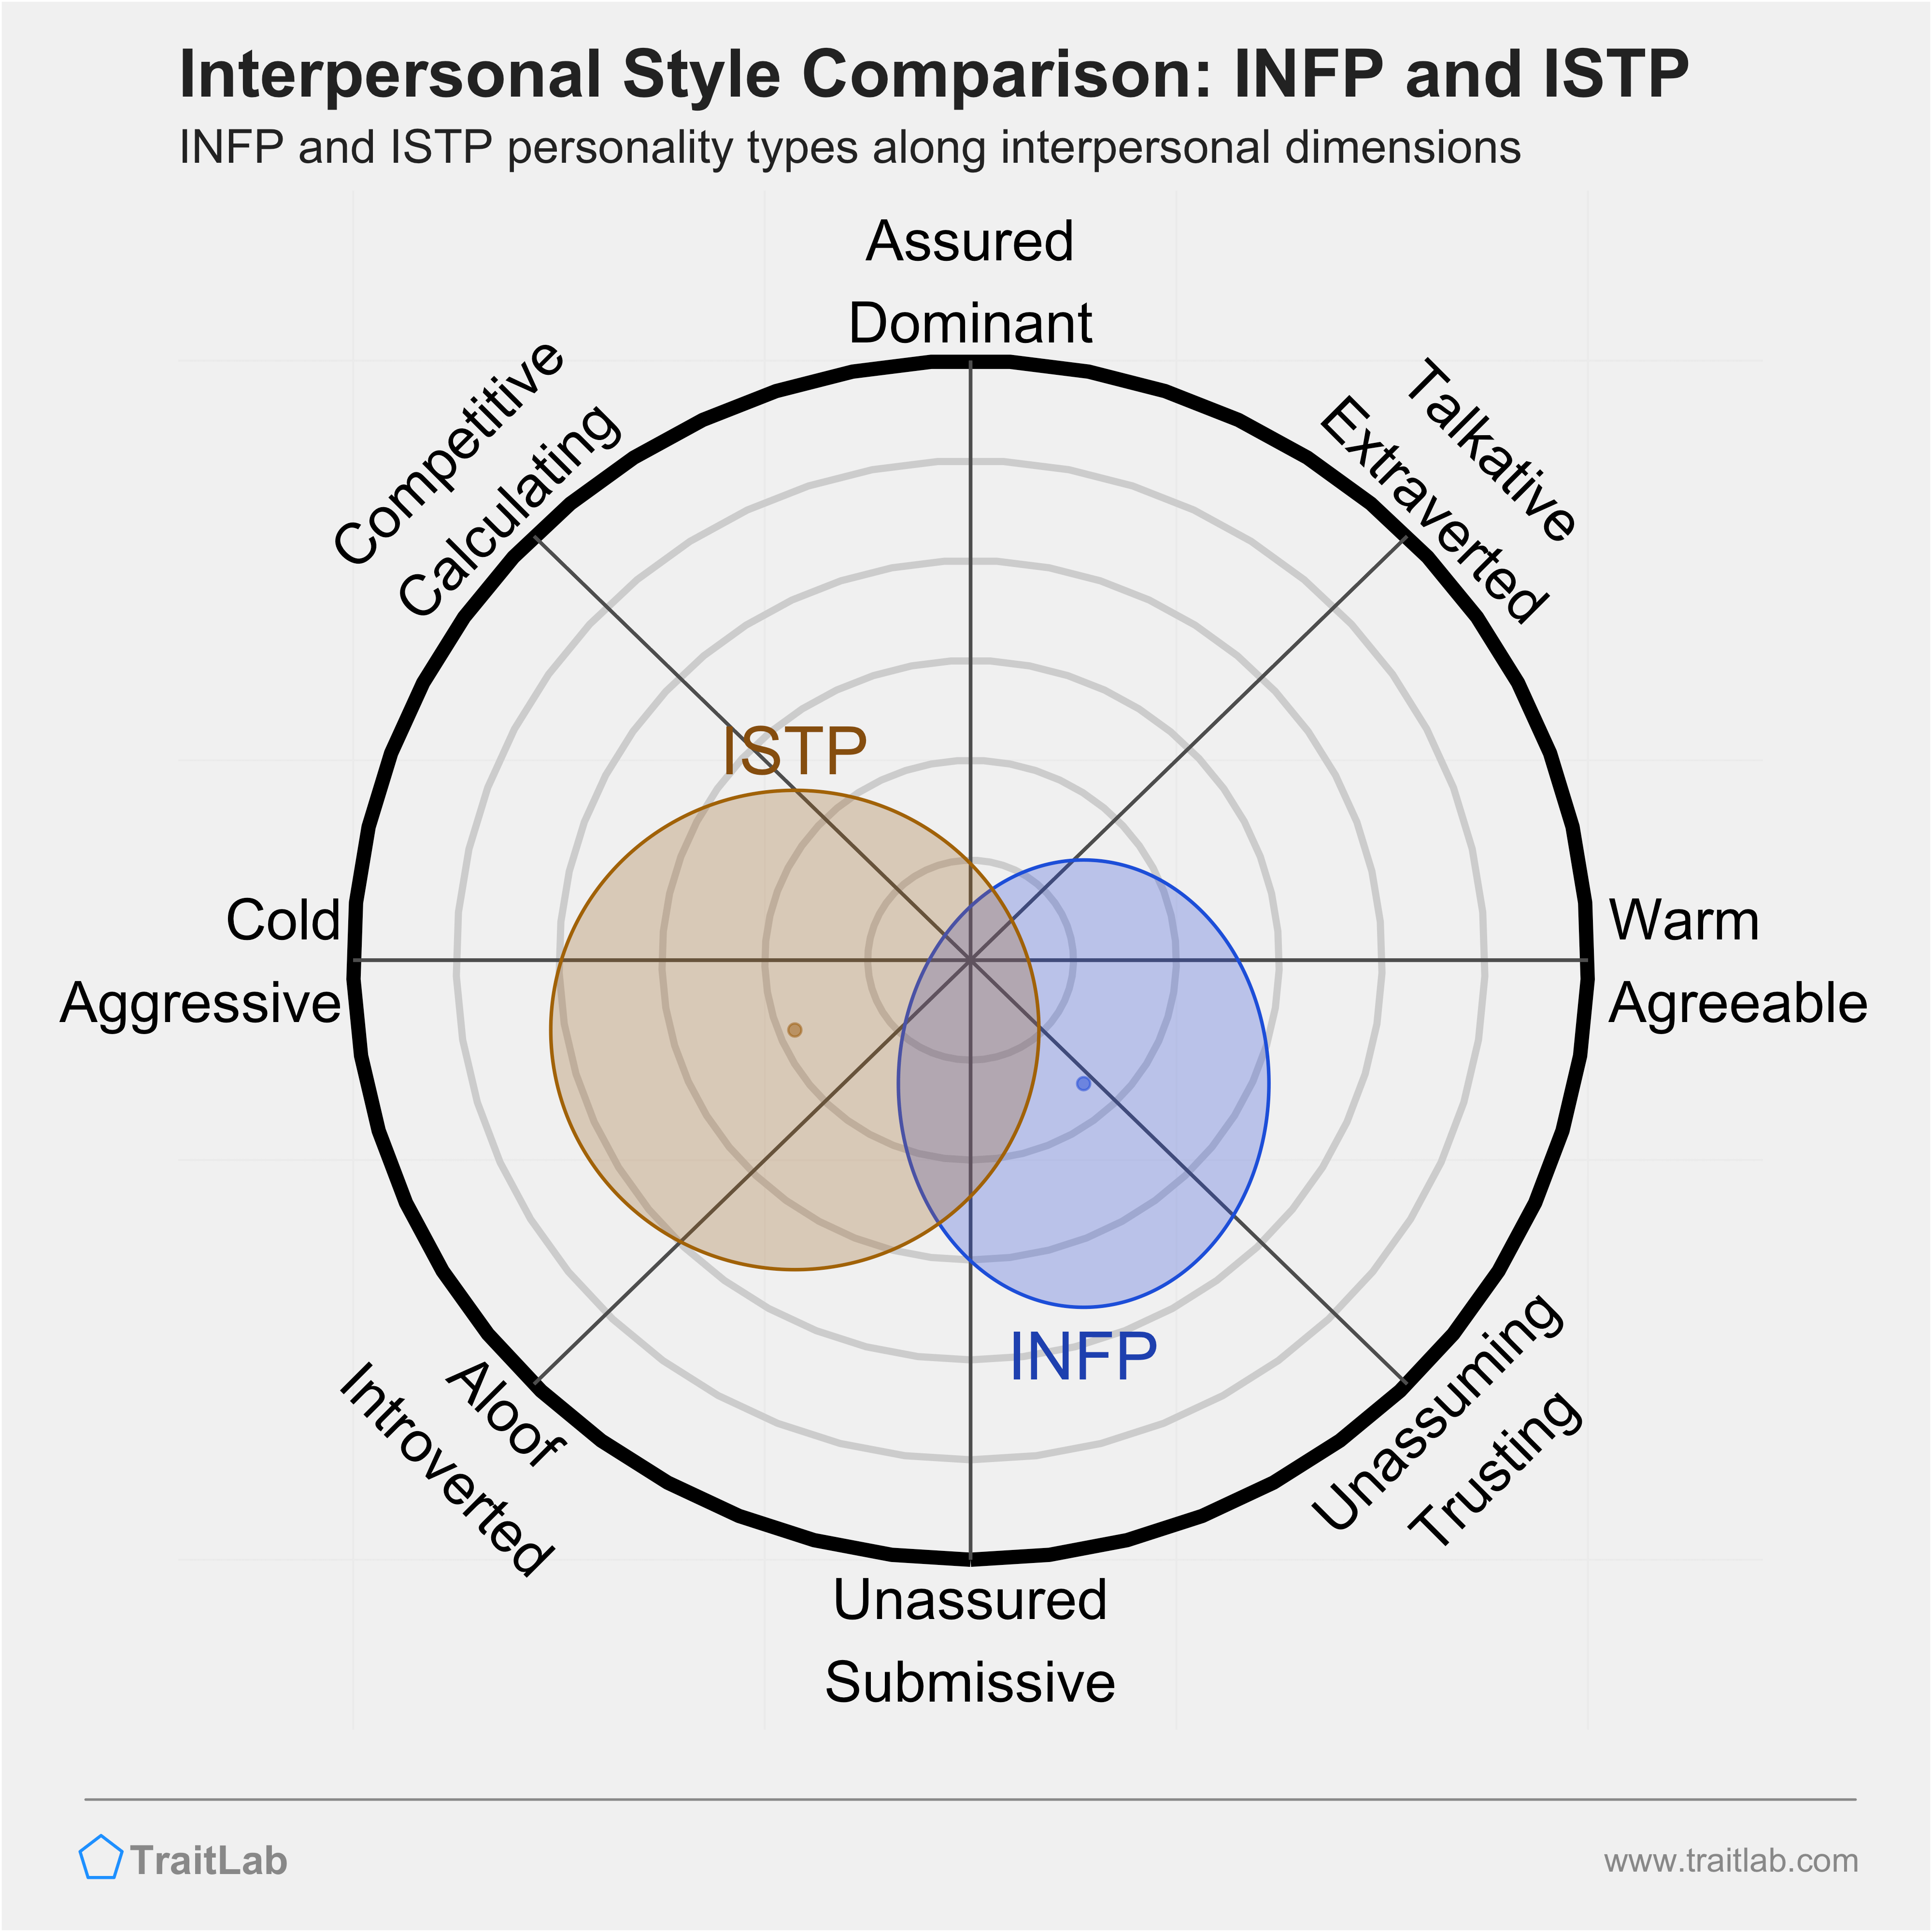 INFP and ISTP comparison across interpersonal dimensions